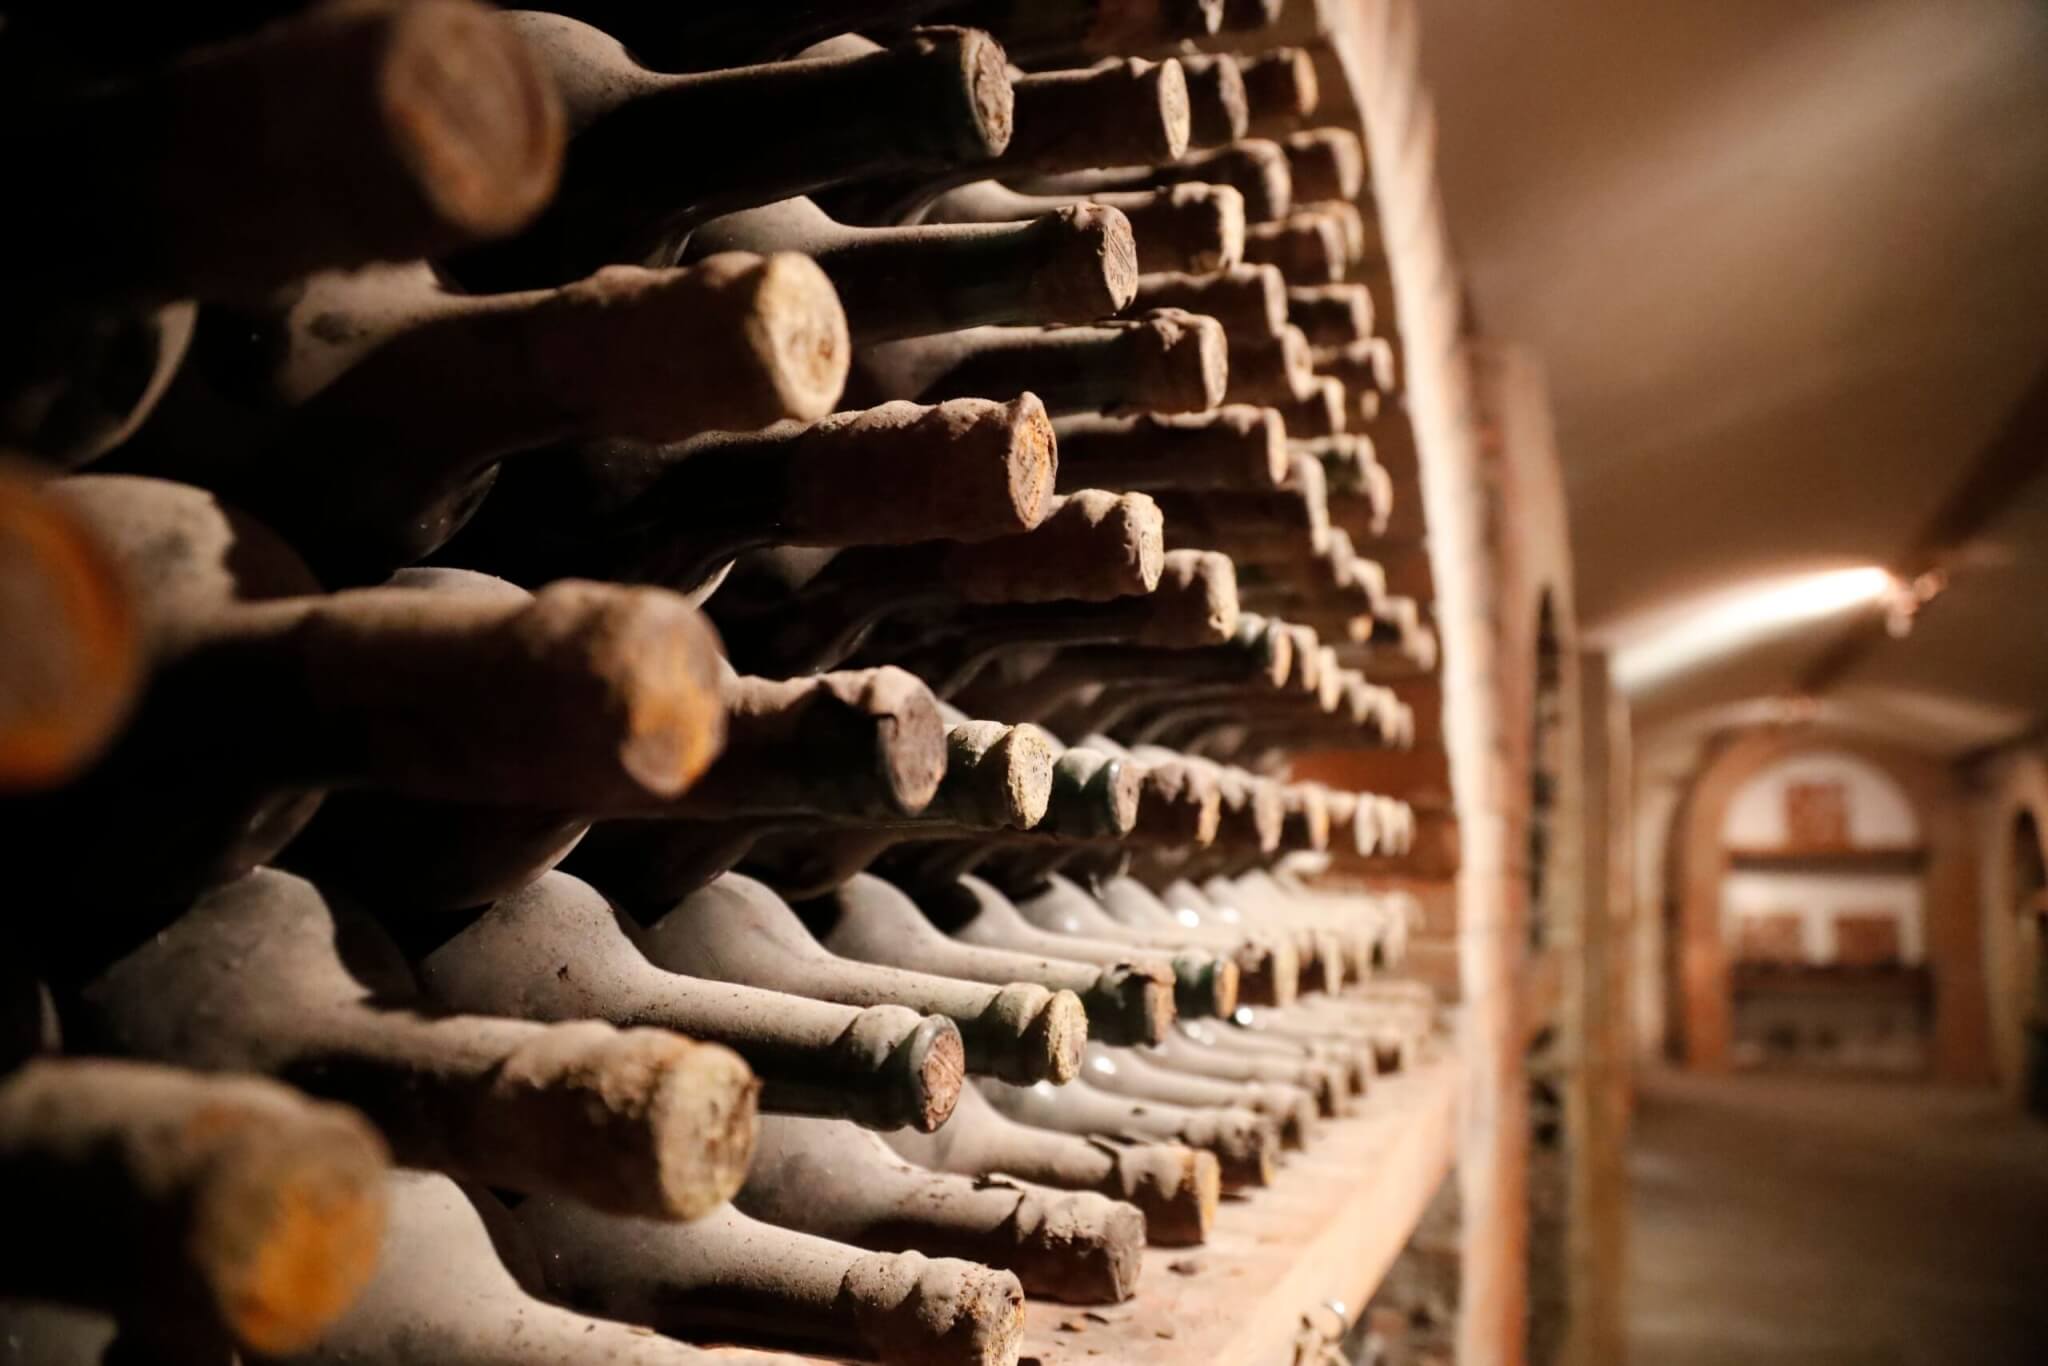 A view of old bottles of Georgian wine at a wine cellar in Tbilisi, Georgia, 30 January 2020. Wine is one of the top Georgian export products.